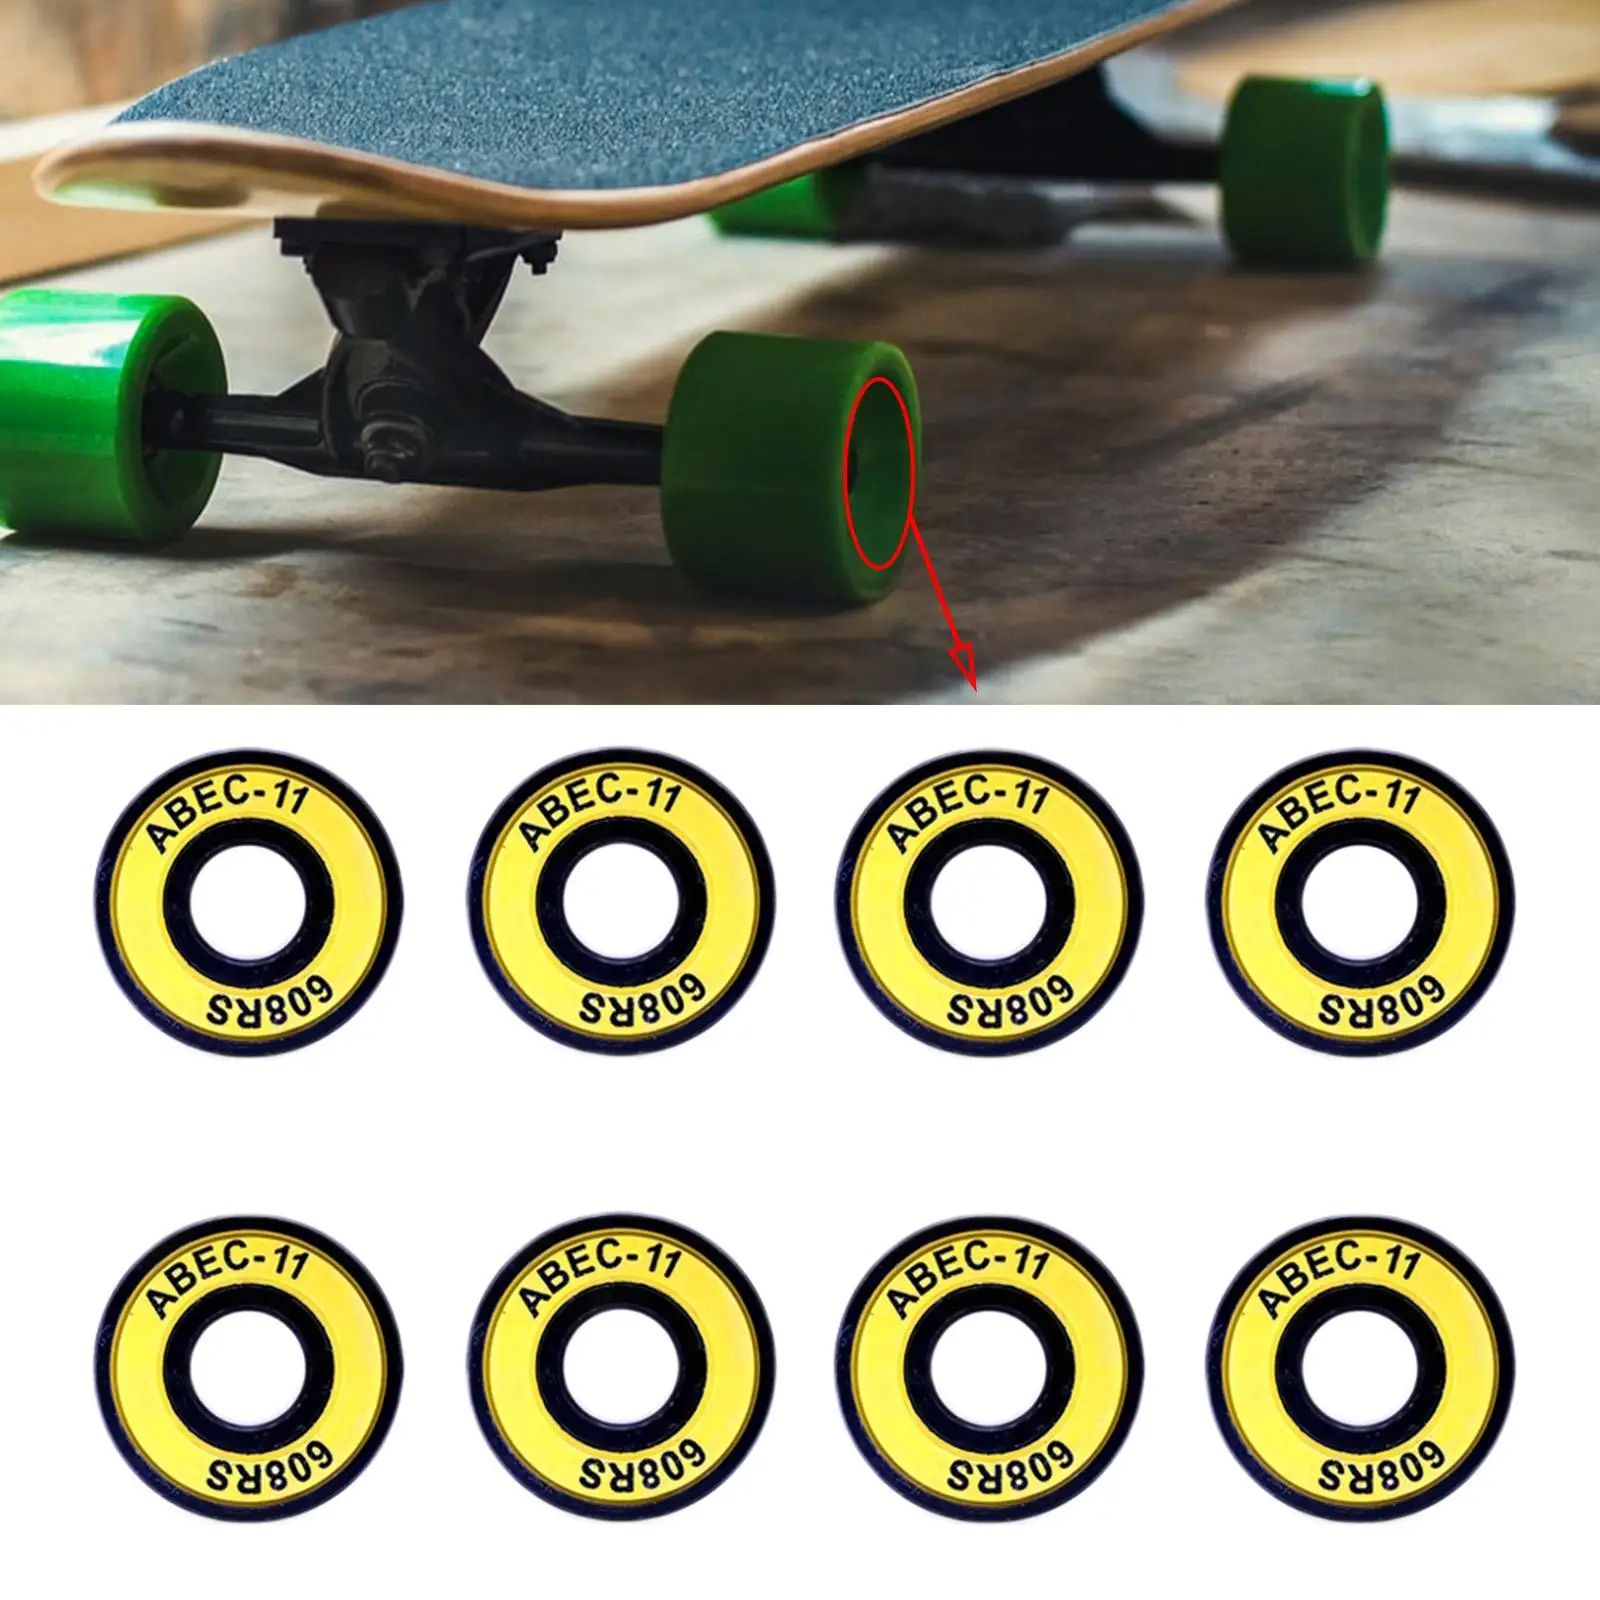 8 Pcs 608-RS Skateboard Bearings High Speed Smooth and Durable, Replace for Longboards, Inline Skates,